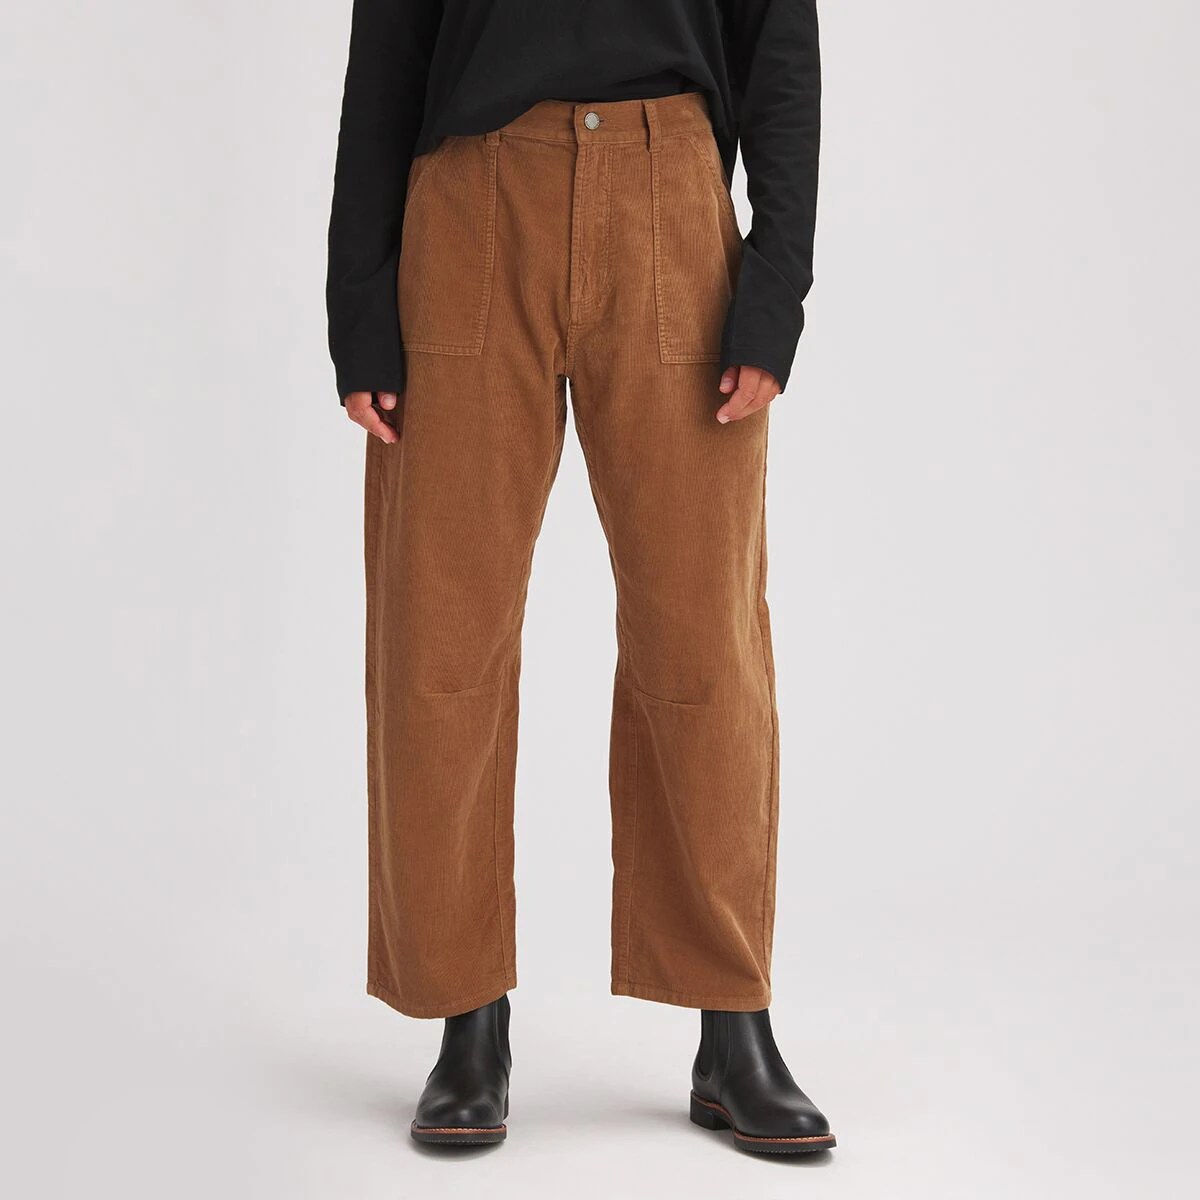 backcountry model wearing basin and range corduroy pants that are on sale at backcountry